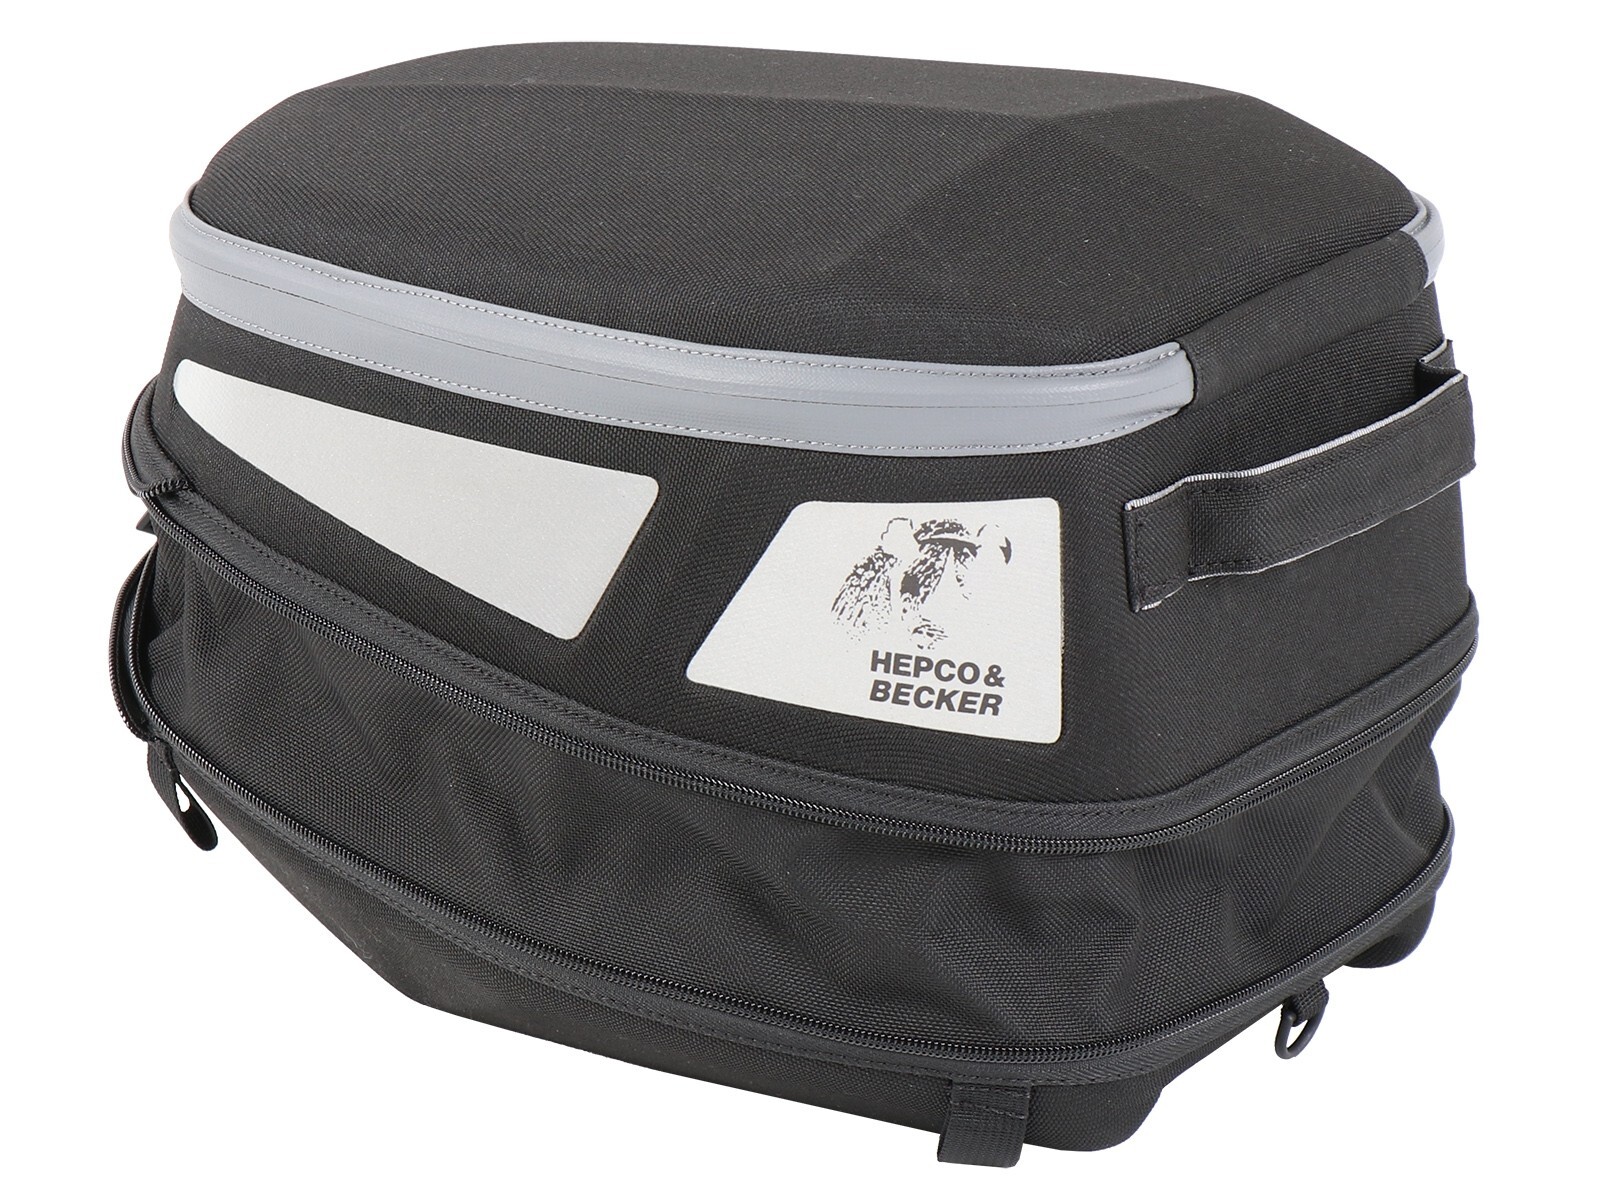 ROYSTER REARBAG SPORT INCL. LOCK-IT ATTACHMENT - BLACK/GREY